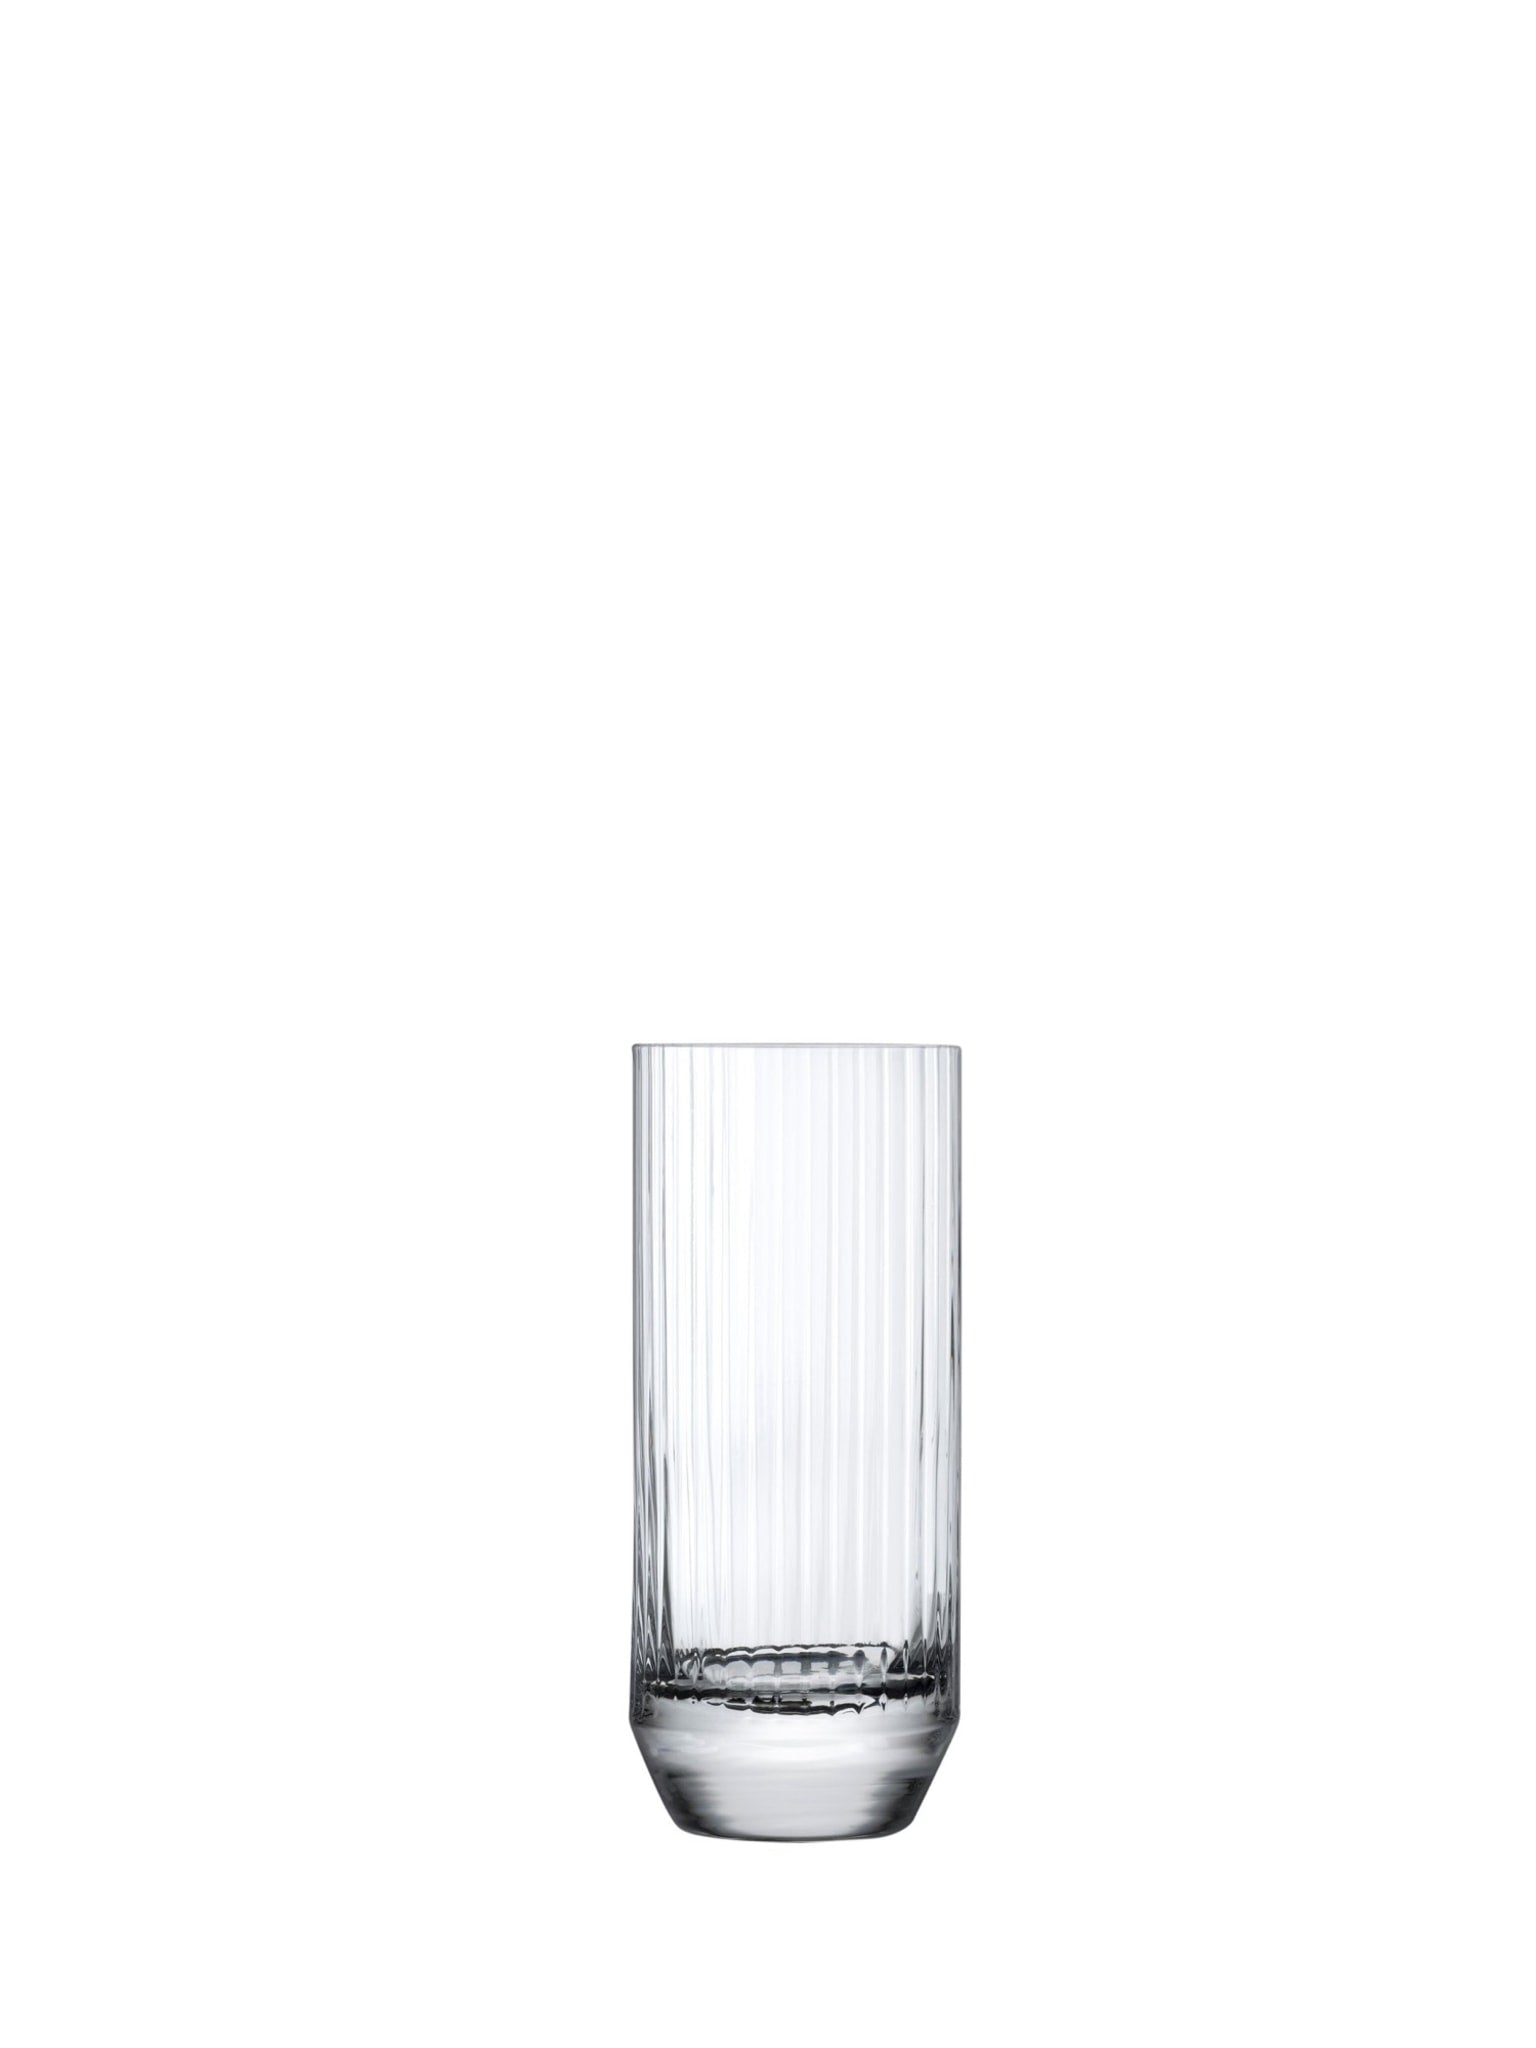 Enjoy your drinks in style with the elegant Nude Big Top glass.